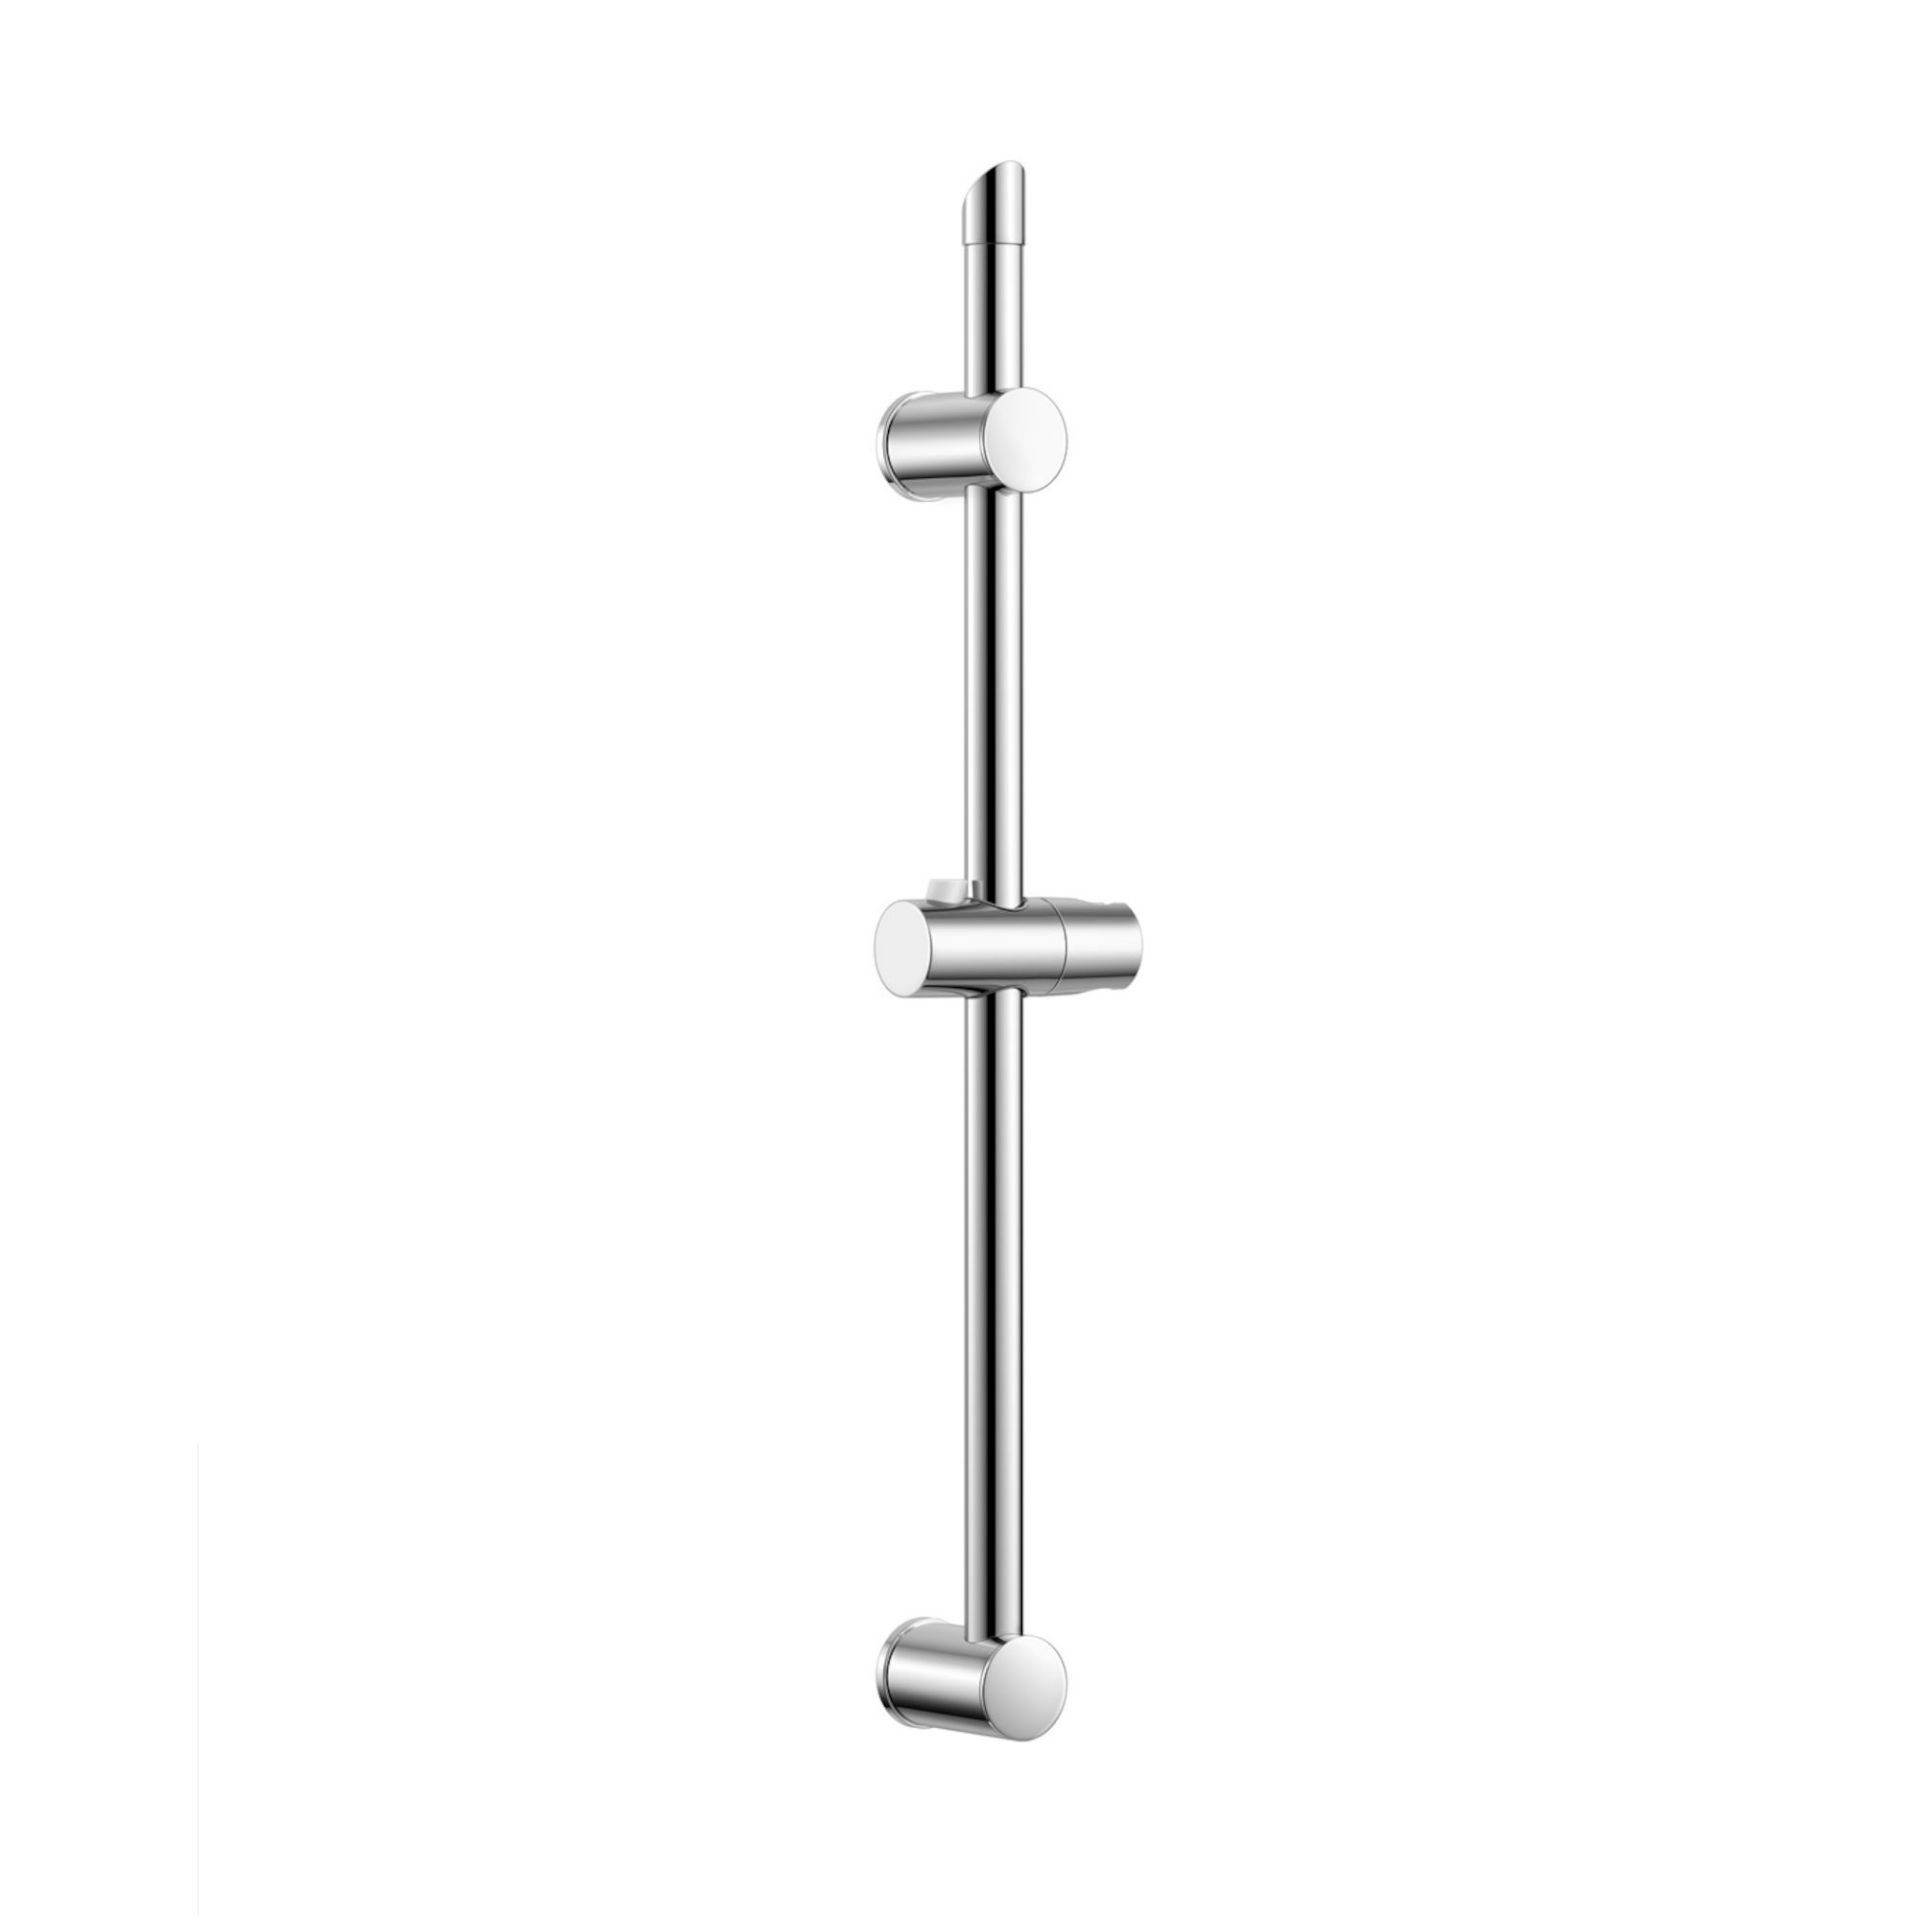 (M1043) Round Stainless Steel Riser Rail Durable stainless steel body Polished chrome finish ...